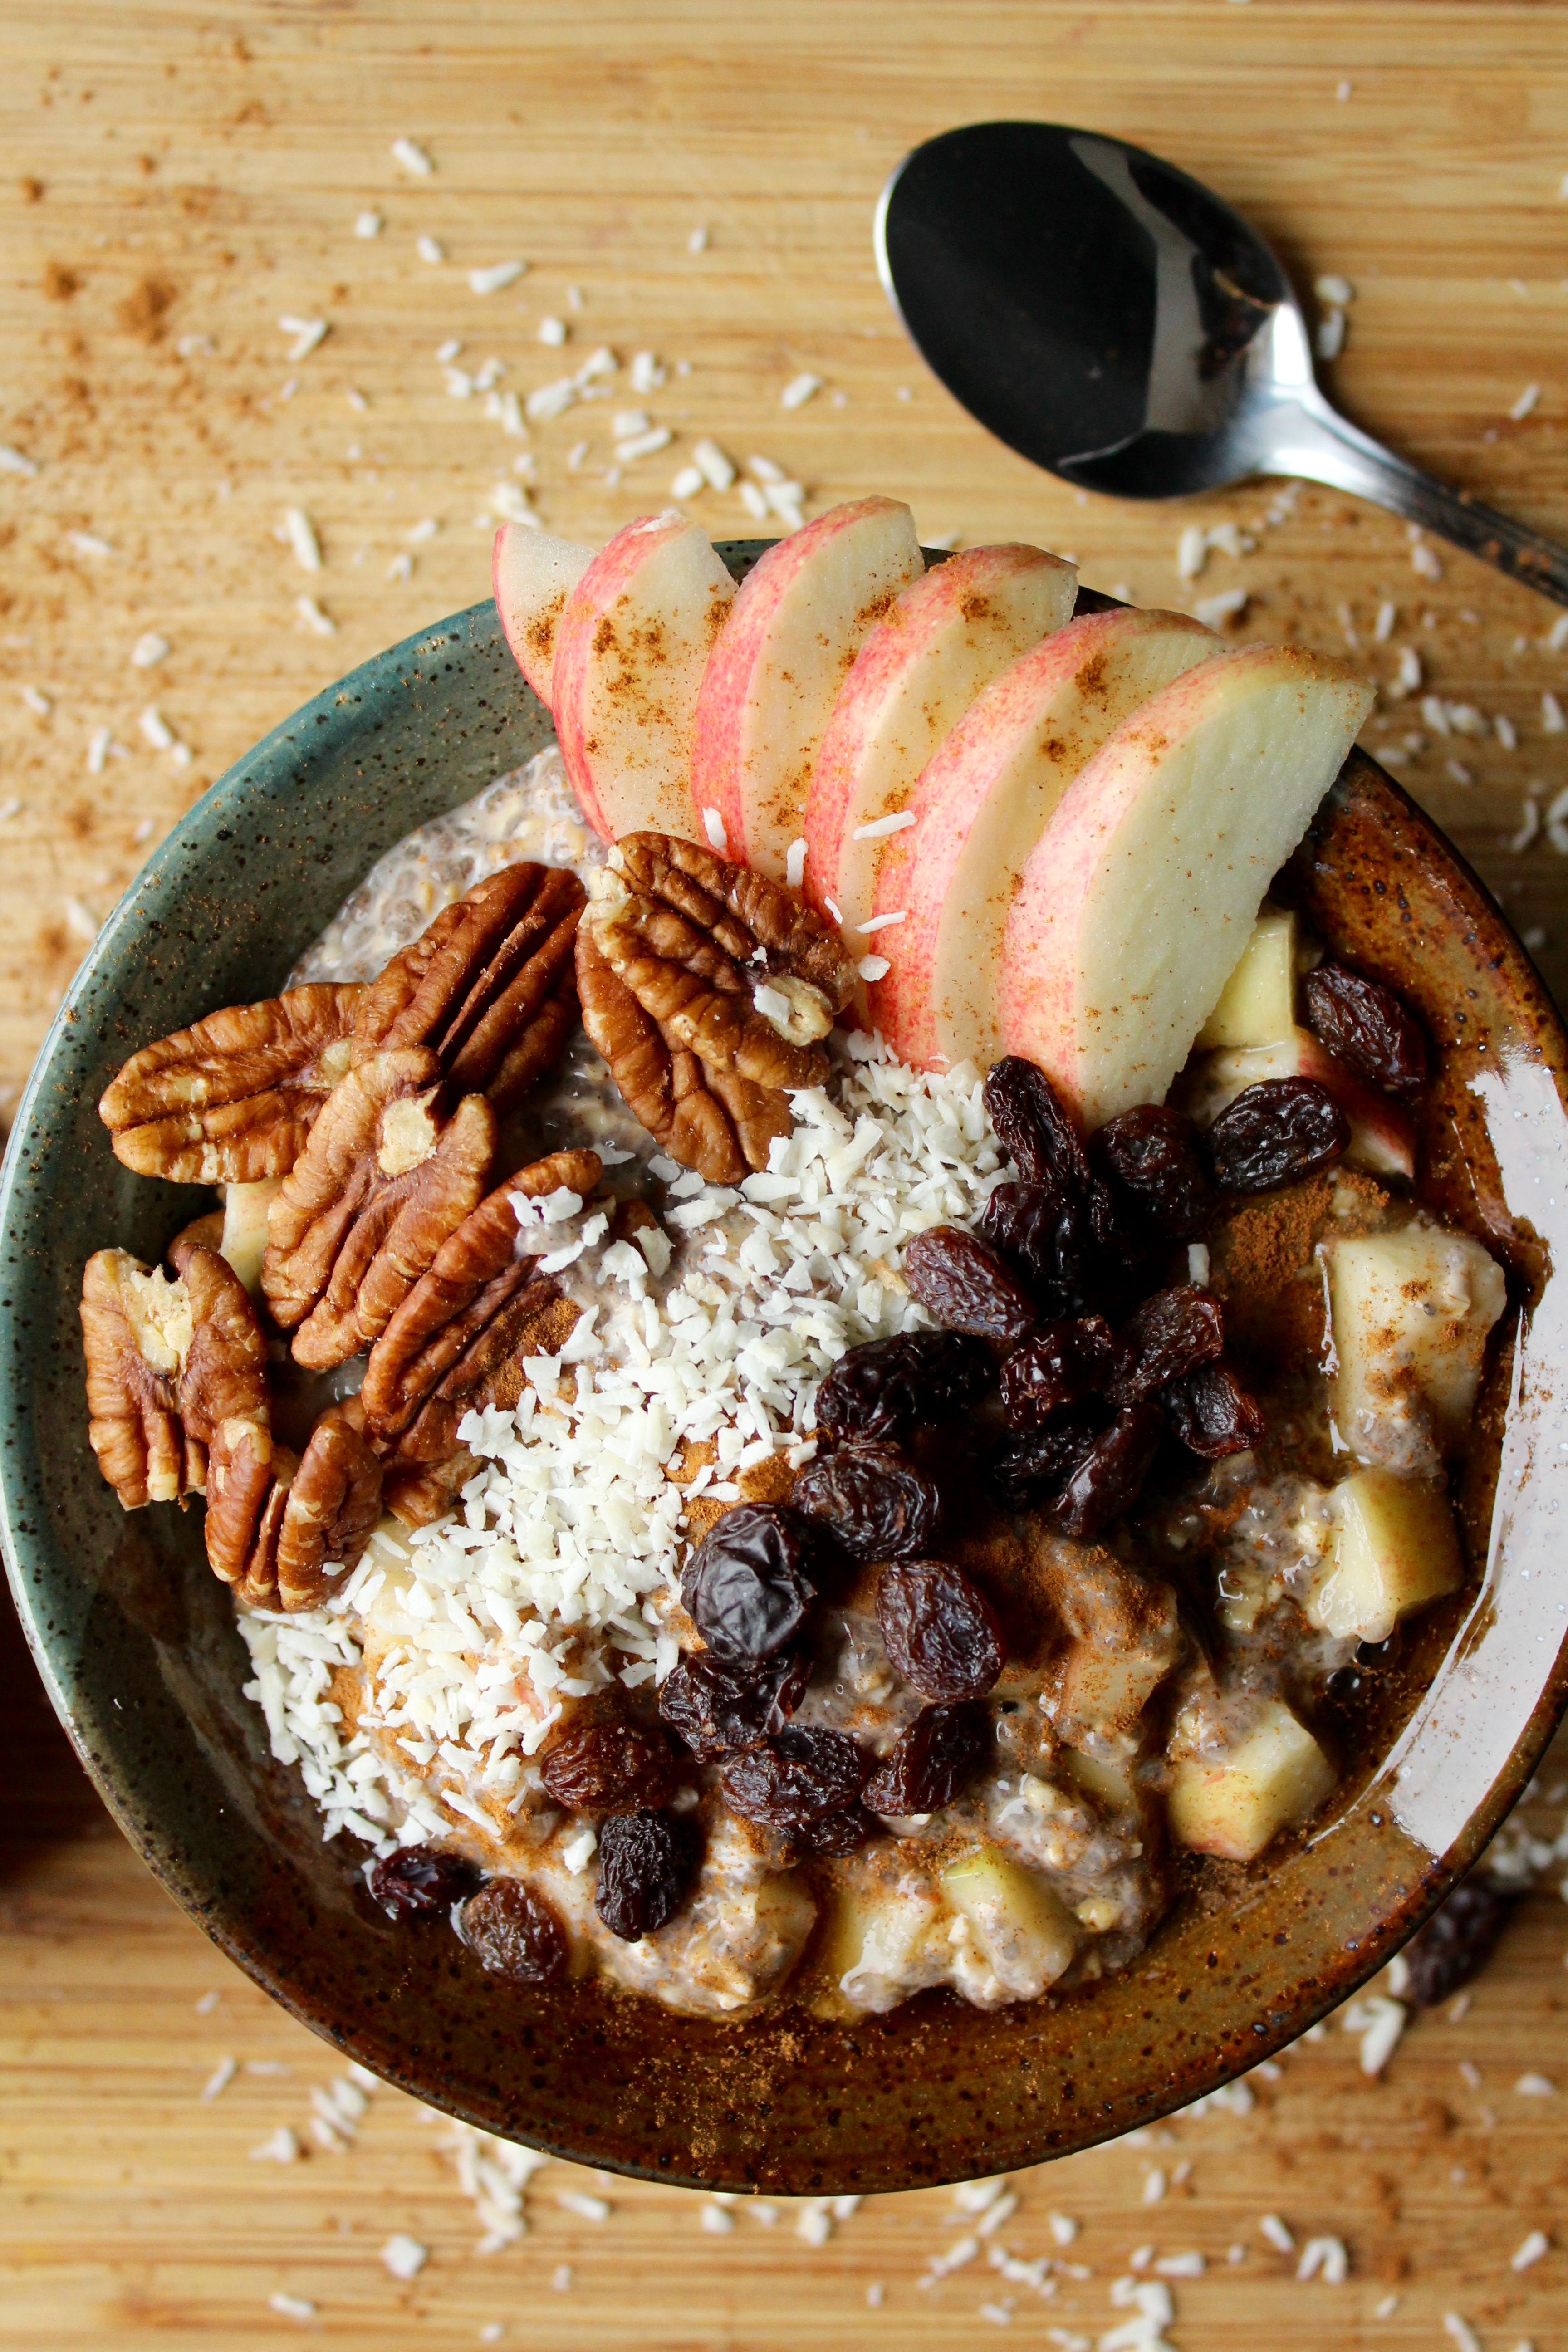 Apple Cinnamon Overnight Oats! These are so good, healthy, and filling! So easy to grab on the way out!